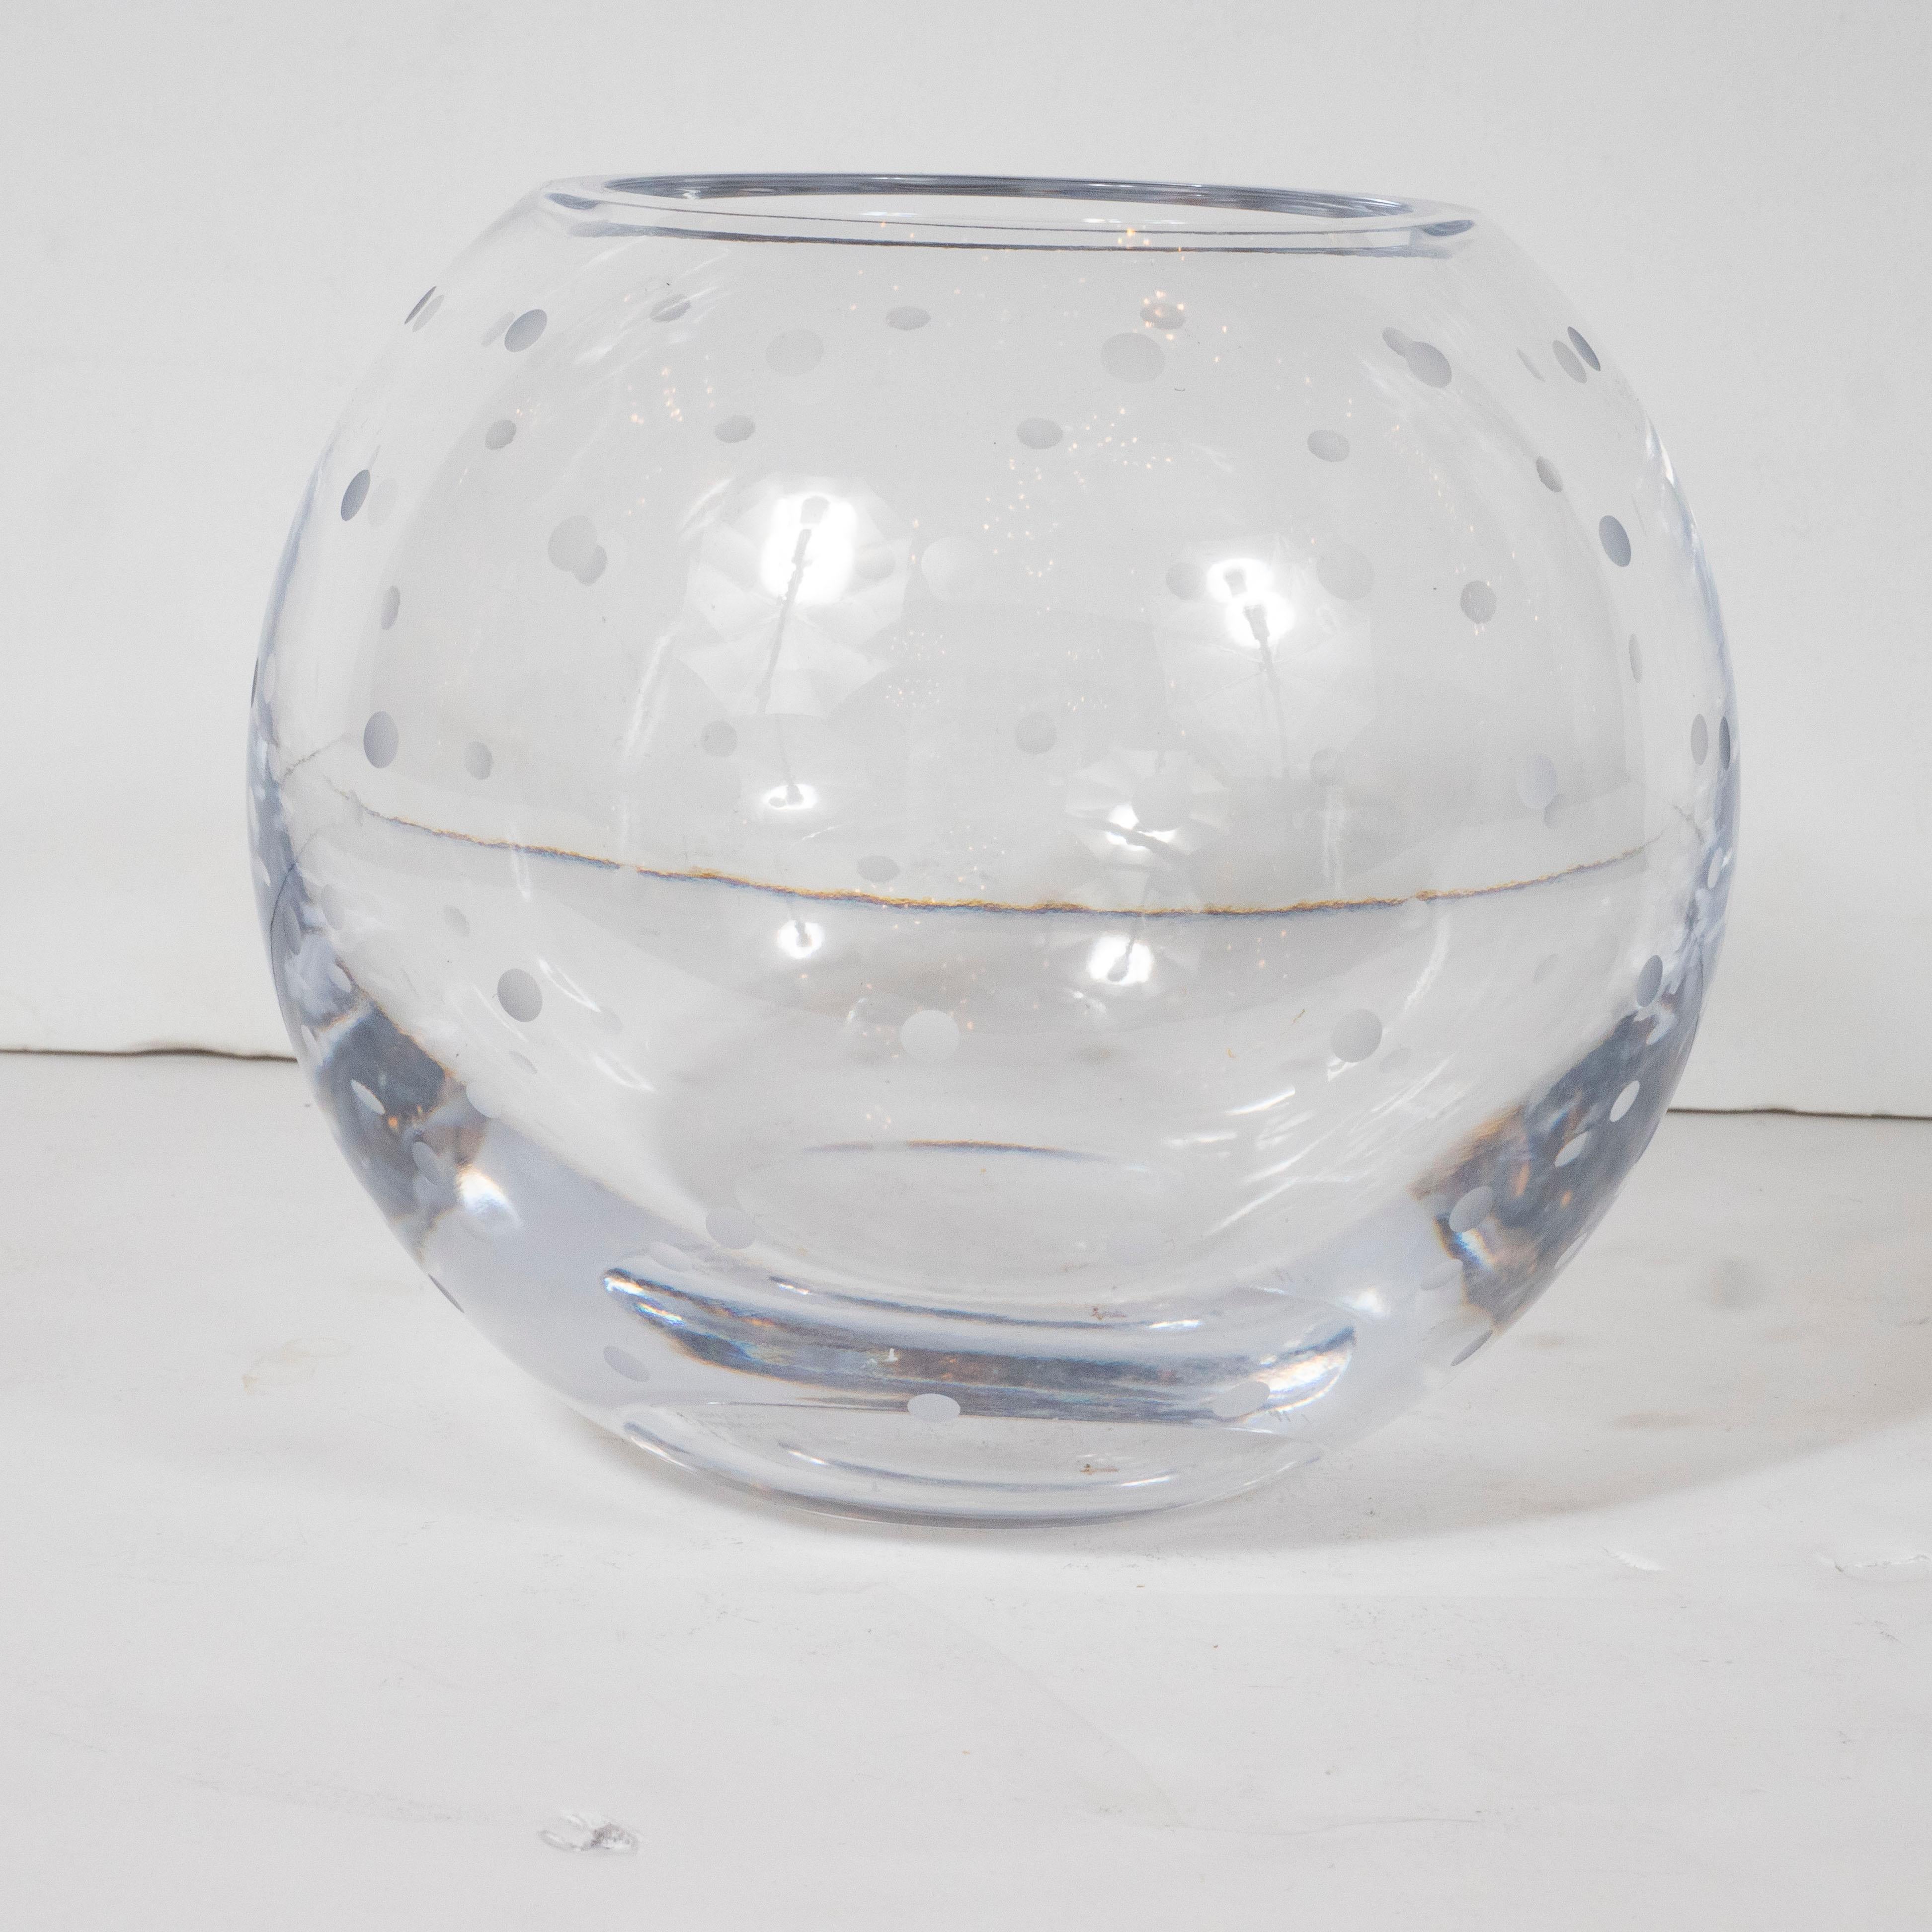 Saint Pierre and Miquelon Modernist Spherical Etched and Dotted Translucent  Vase For Sale